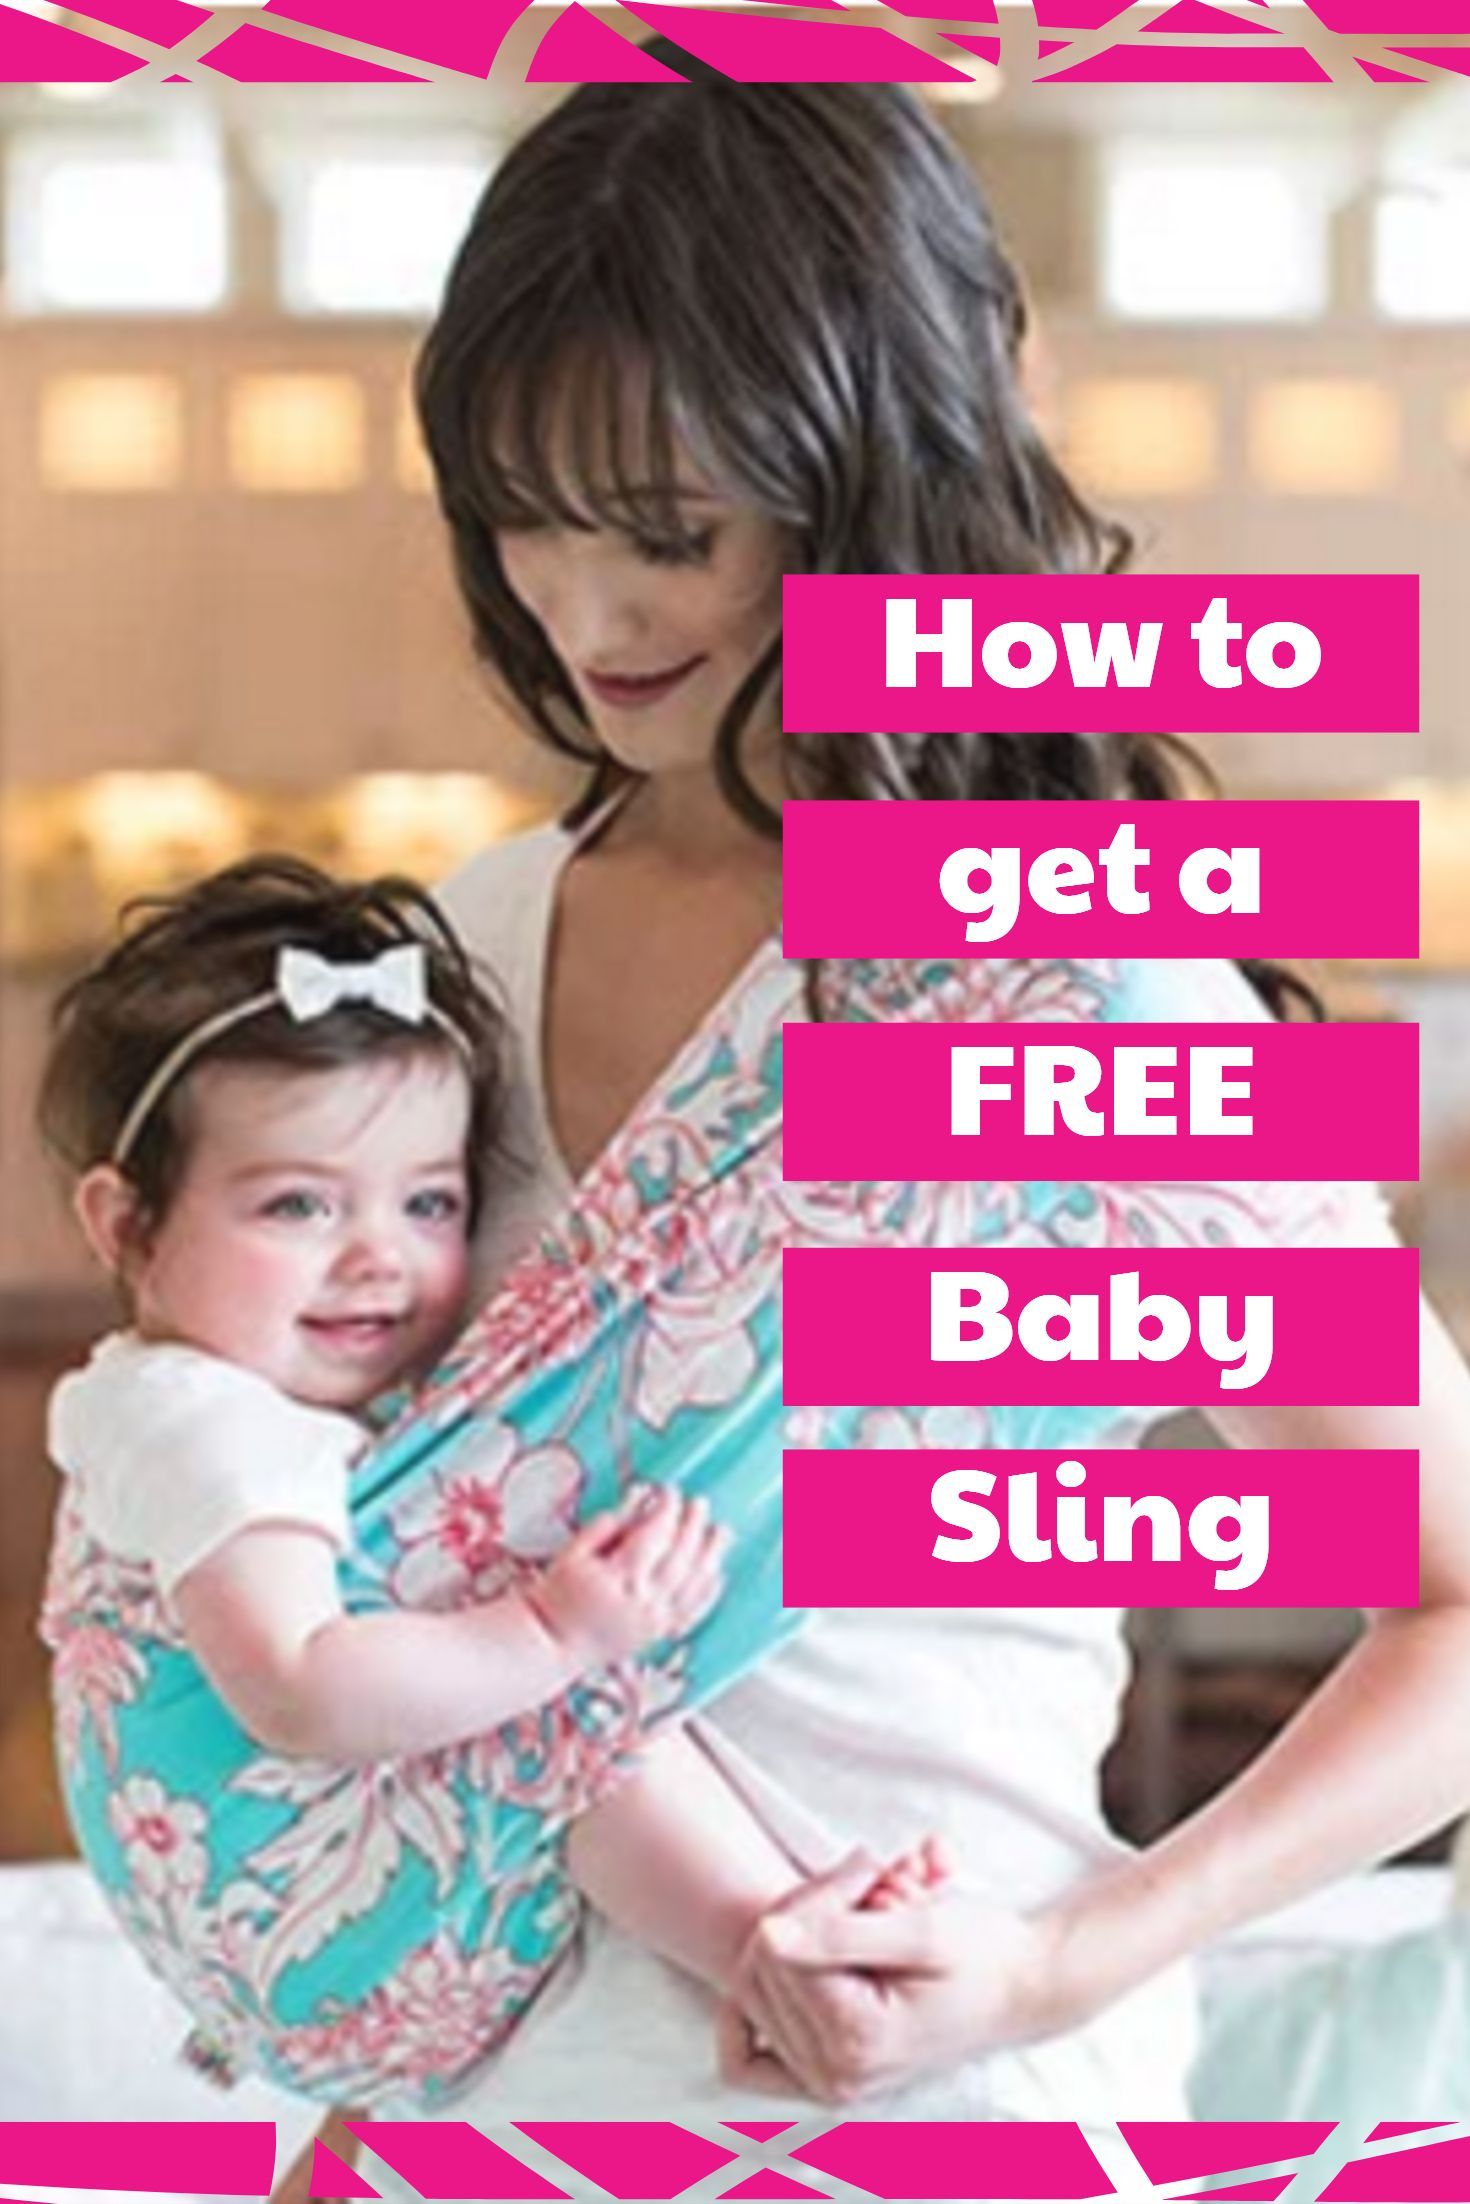 15 Awesome Free Baby Products You Can Score Today - $609 value! -   21 diy Baby sling ideas